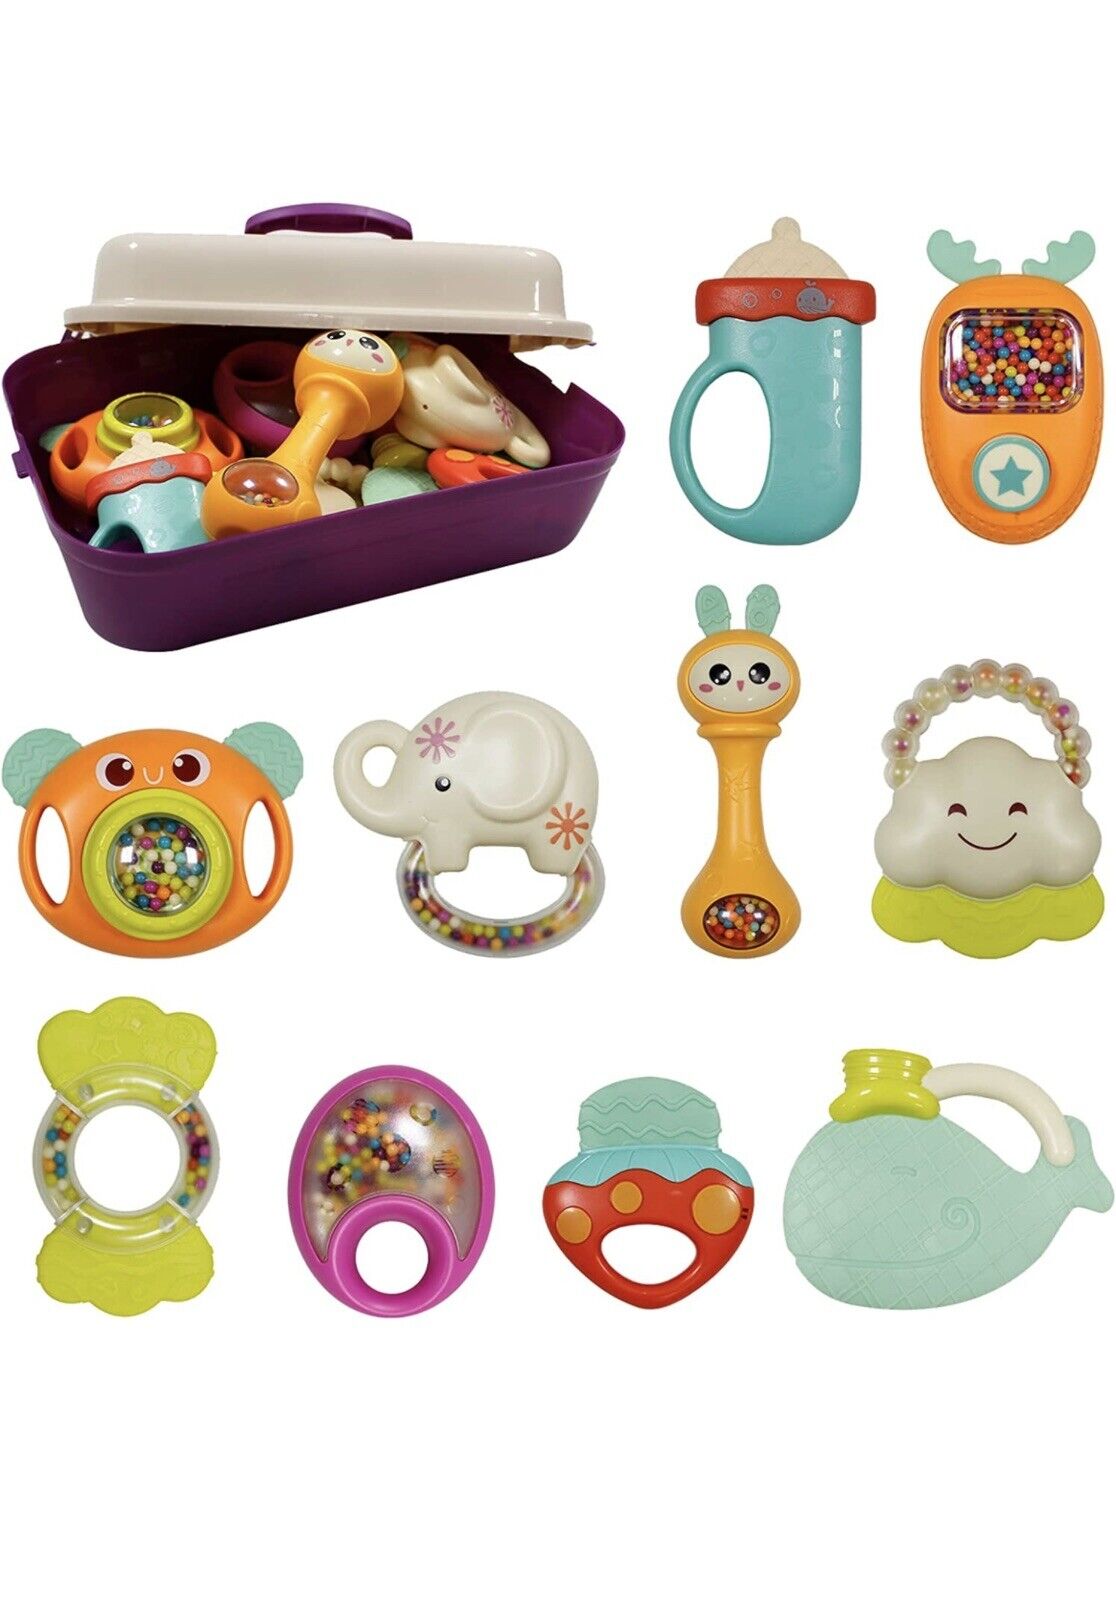 10-Piece Baby Rattles & Teethers Set